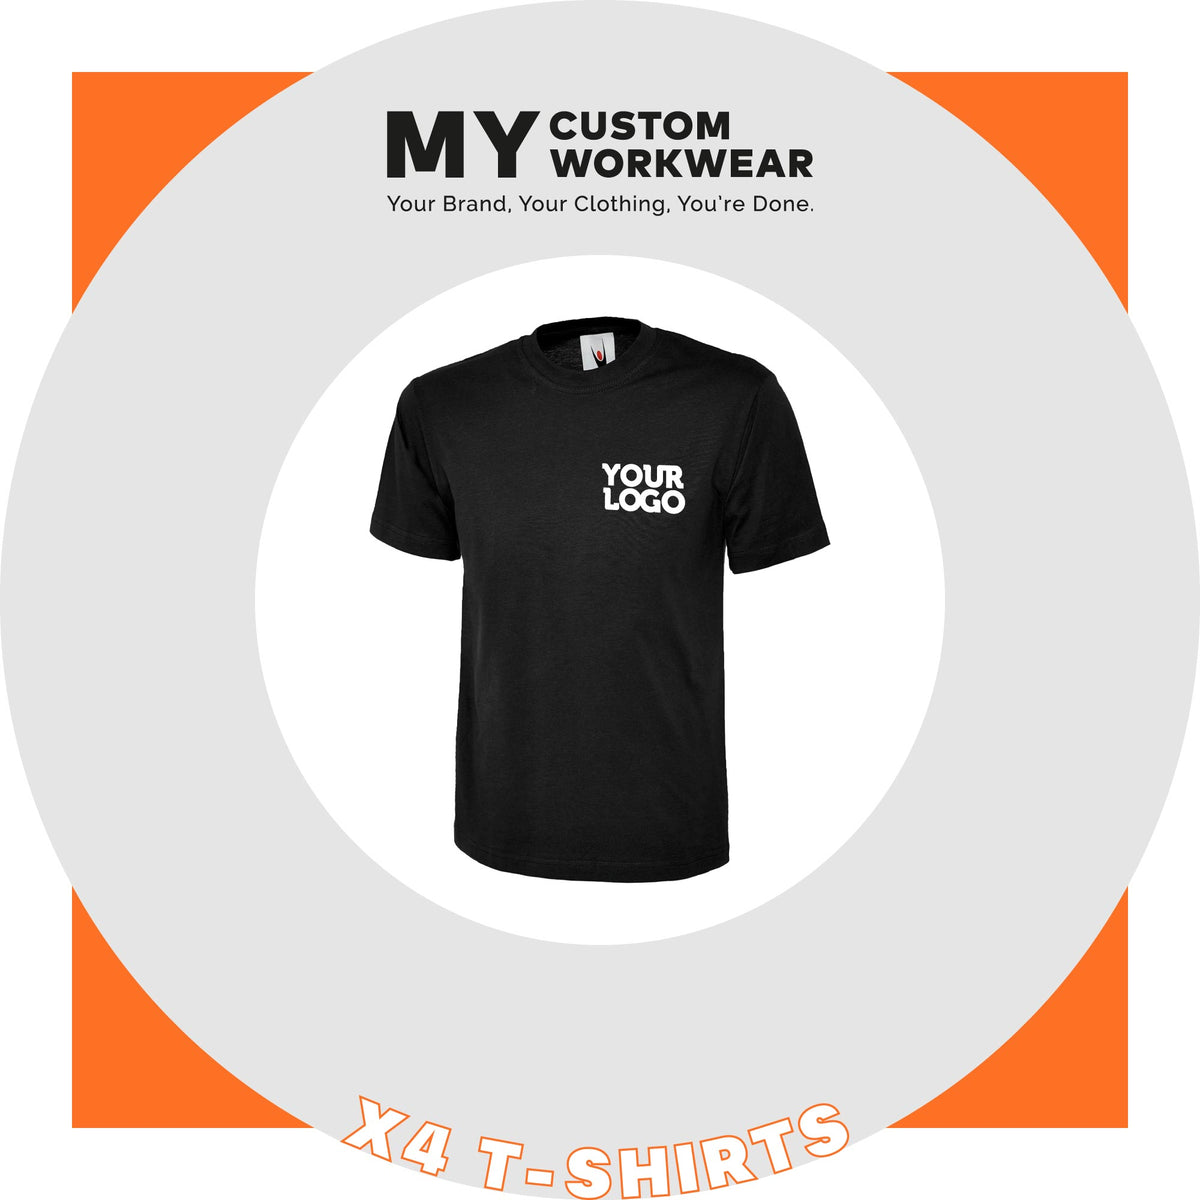 PERSONALISED EMBROIDERED T SHIRT WORKWEAR PACKAGE UNIFORM BUNDLE PACK 10 